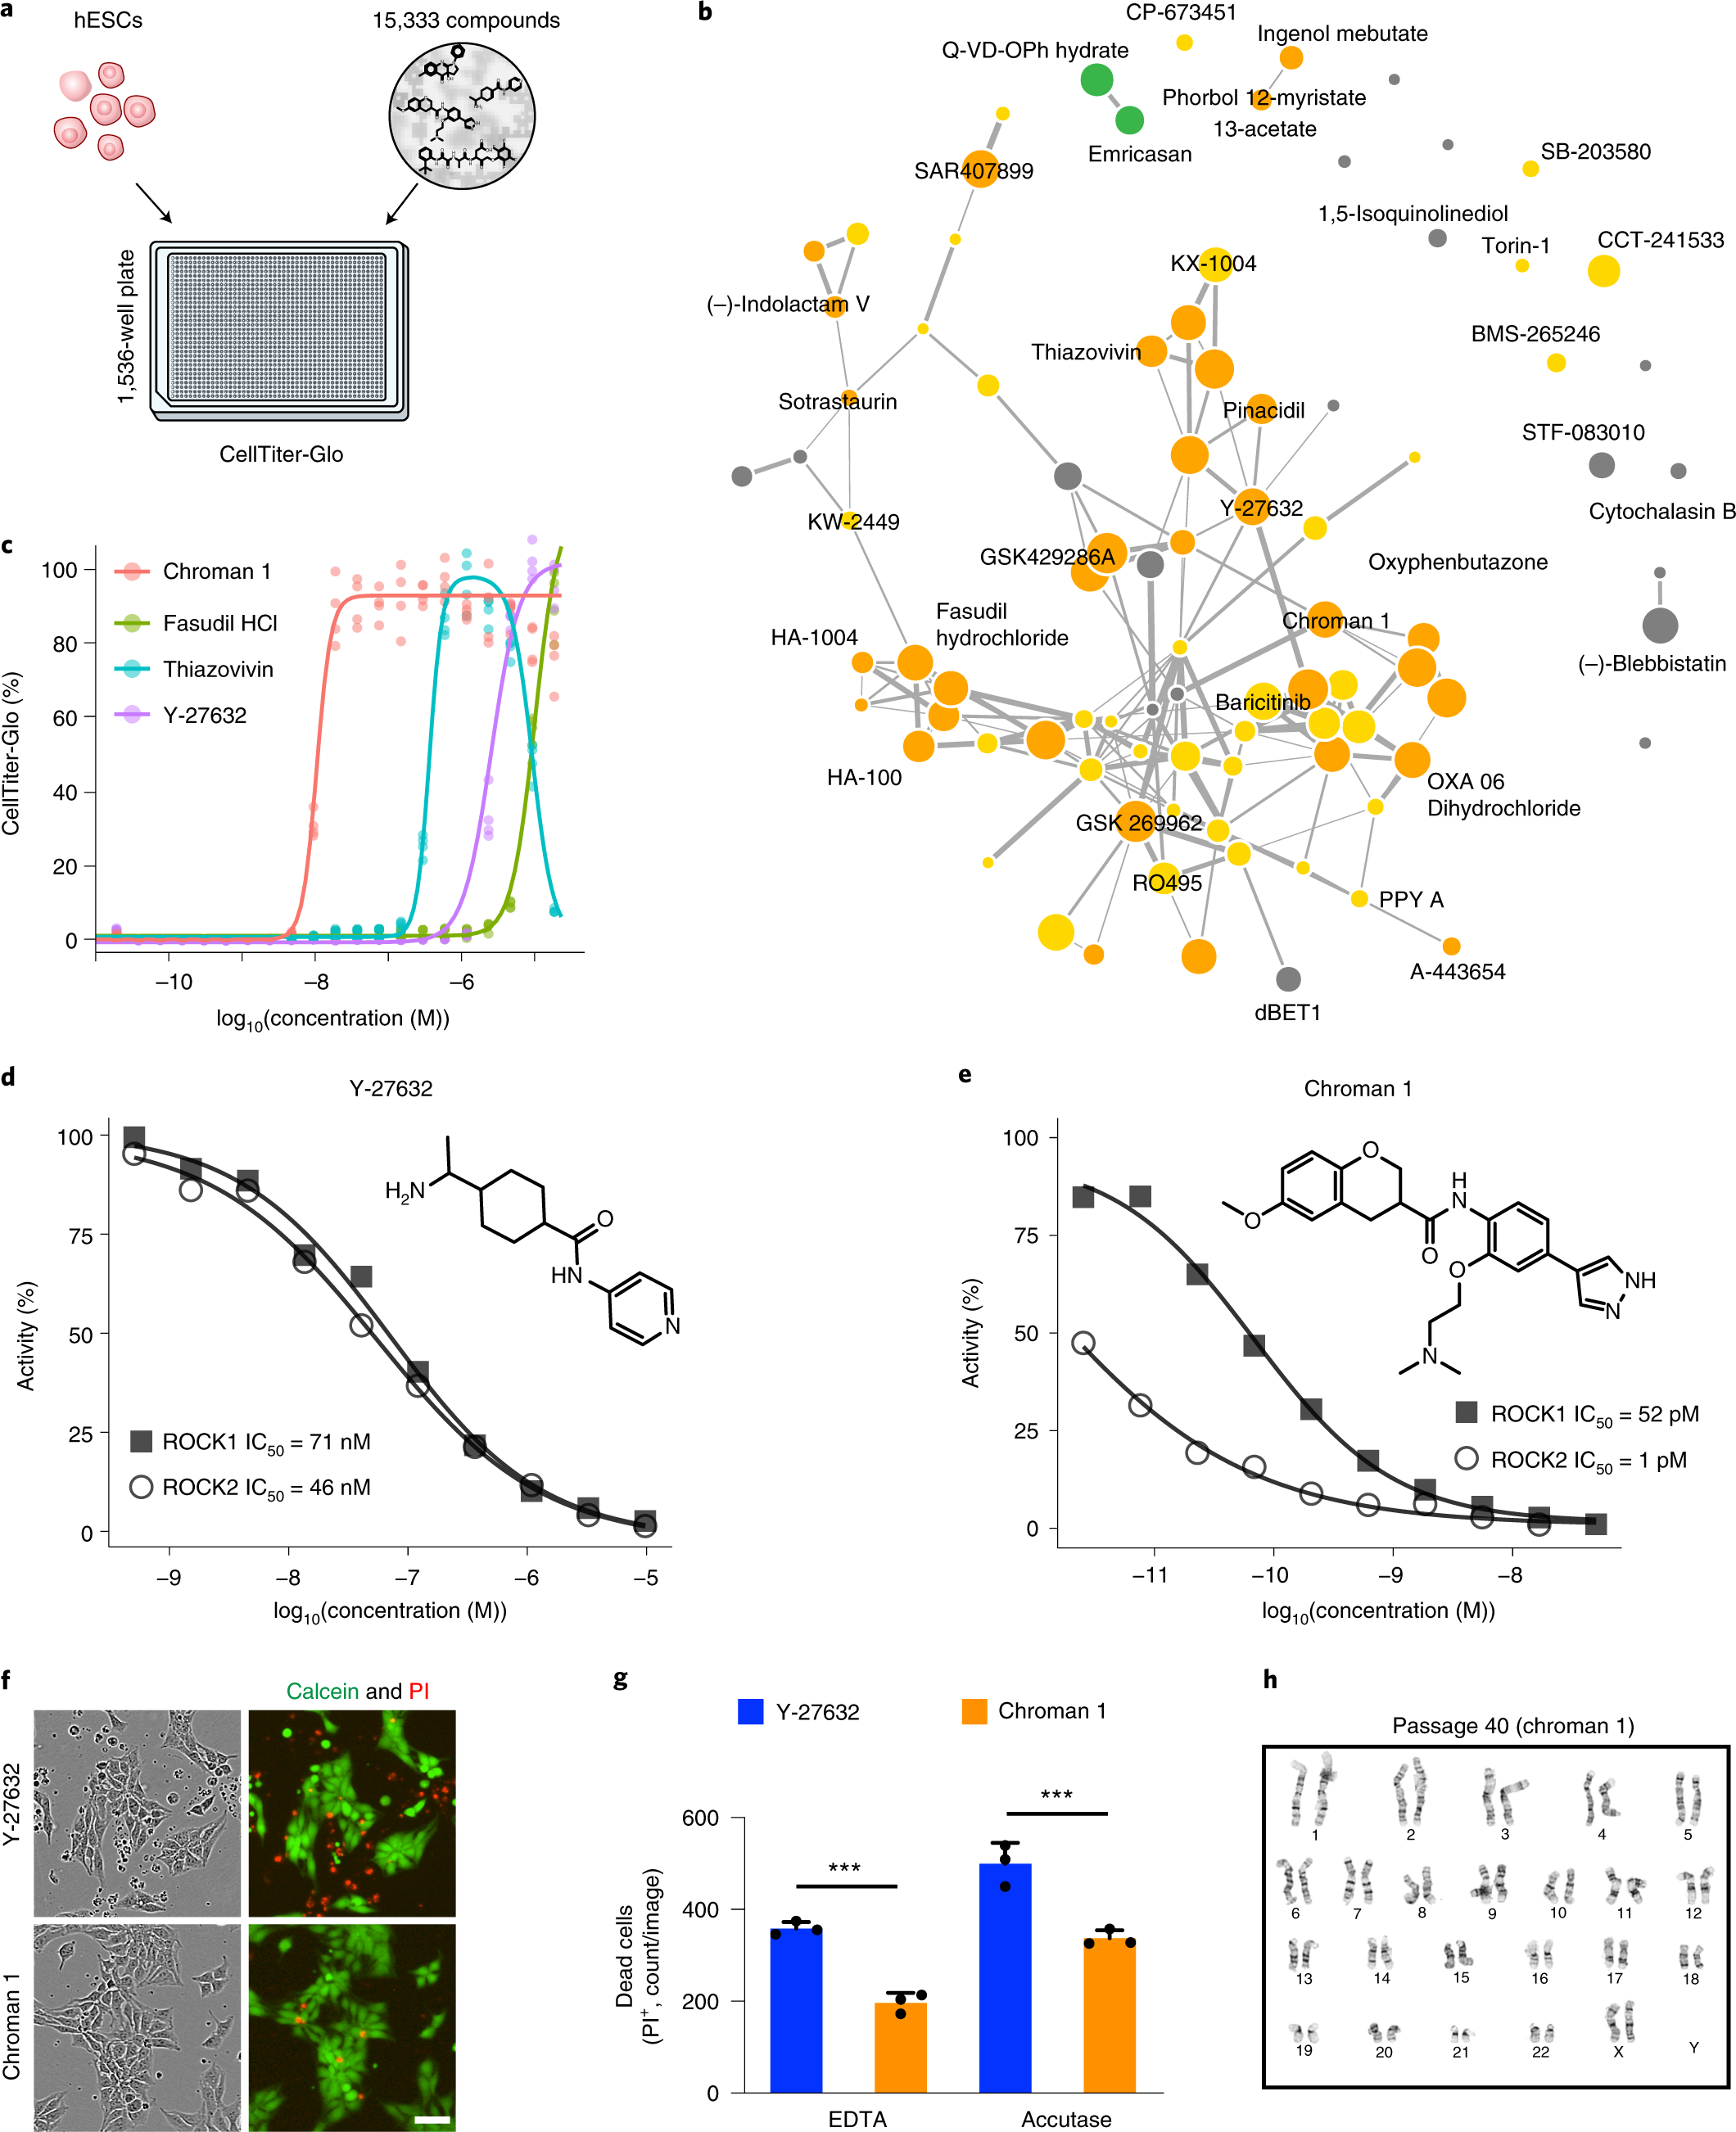 A Versatile Polypharmacology Platform Promotes Cytoprotection And Viability Of Human Pluripotent And Differentiated Cells Nature Methods